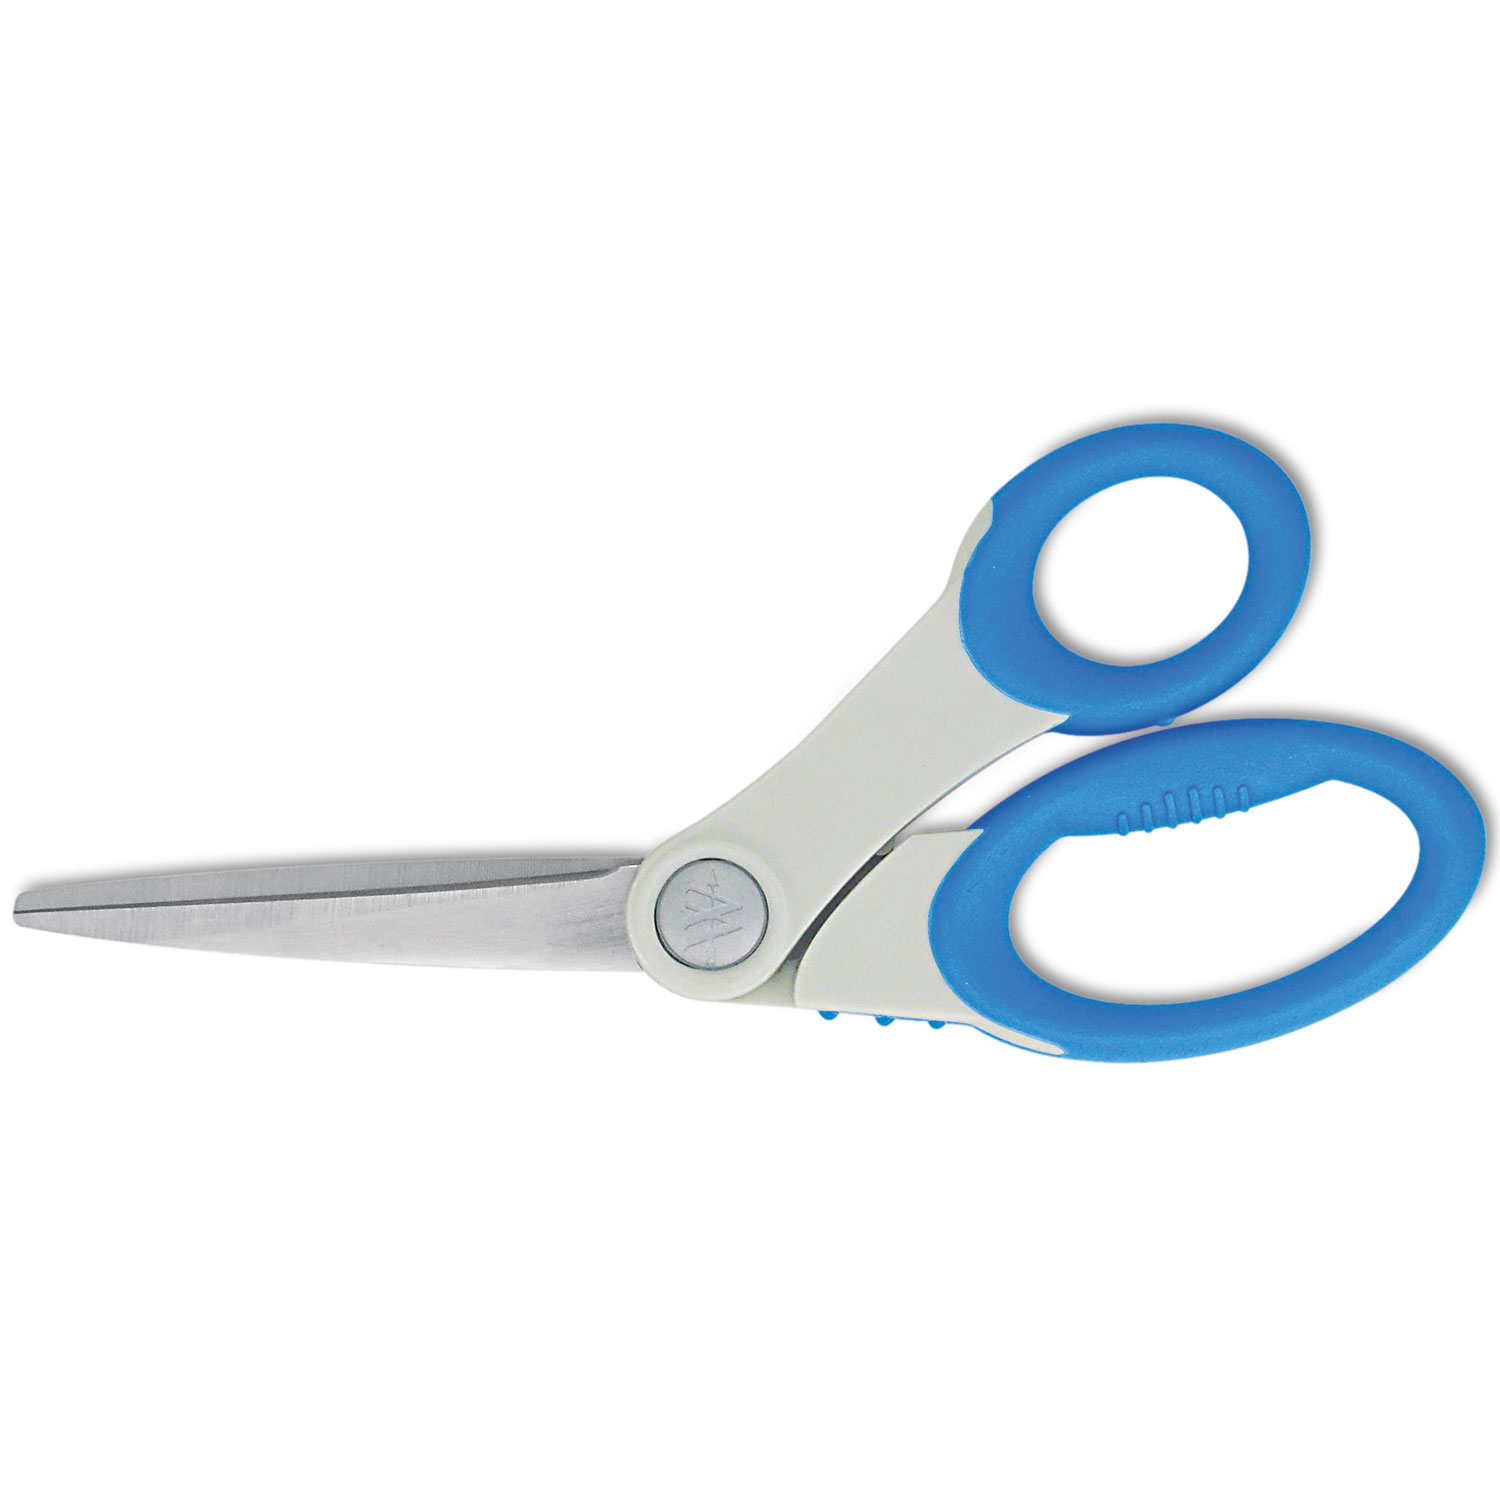  Westcott 14739 Scissors with Antimicrobial Protection, 8 Long, 3.5 Cut Length, Blue Offset Handle (ACM14739) 